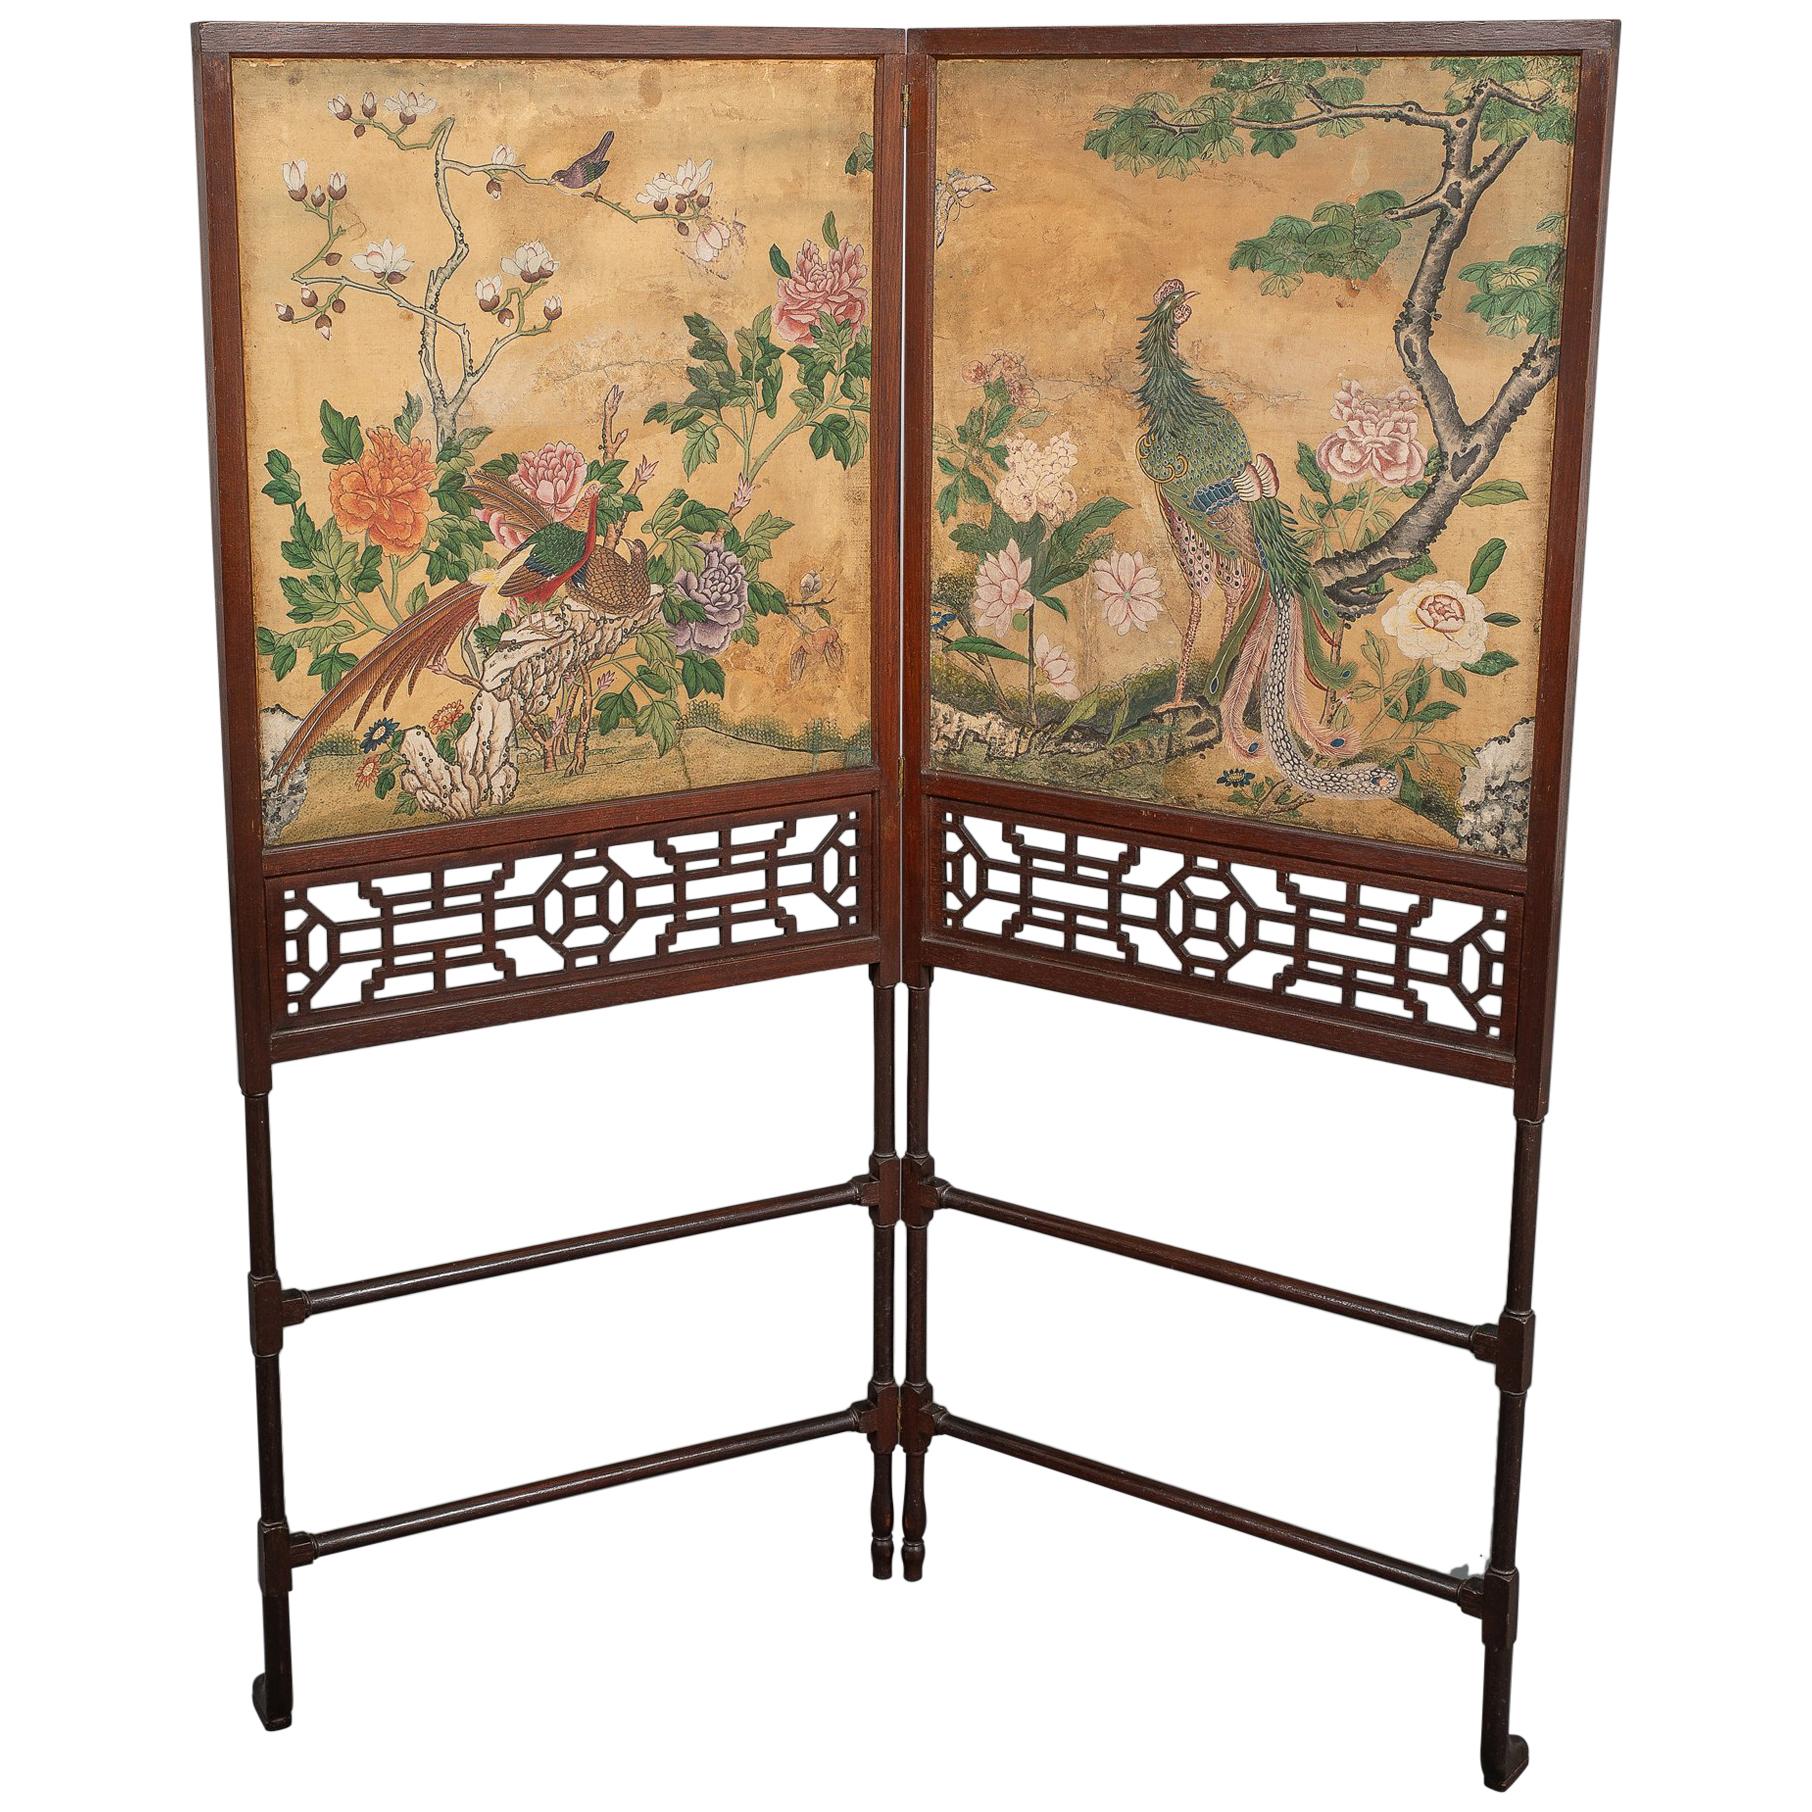 George III Folding Firescreen in the Chinese Chippendale Taste